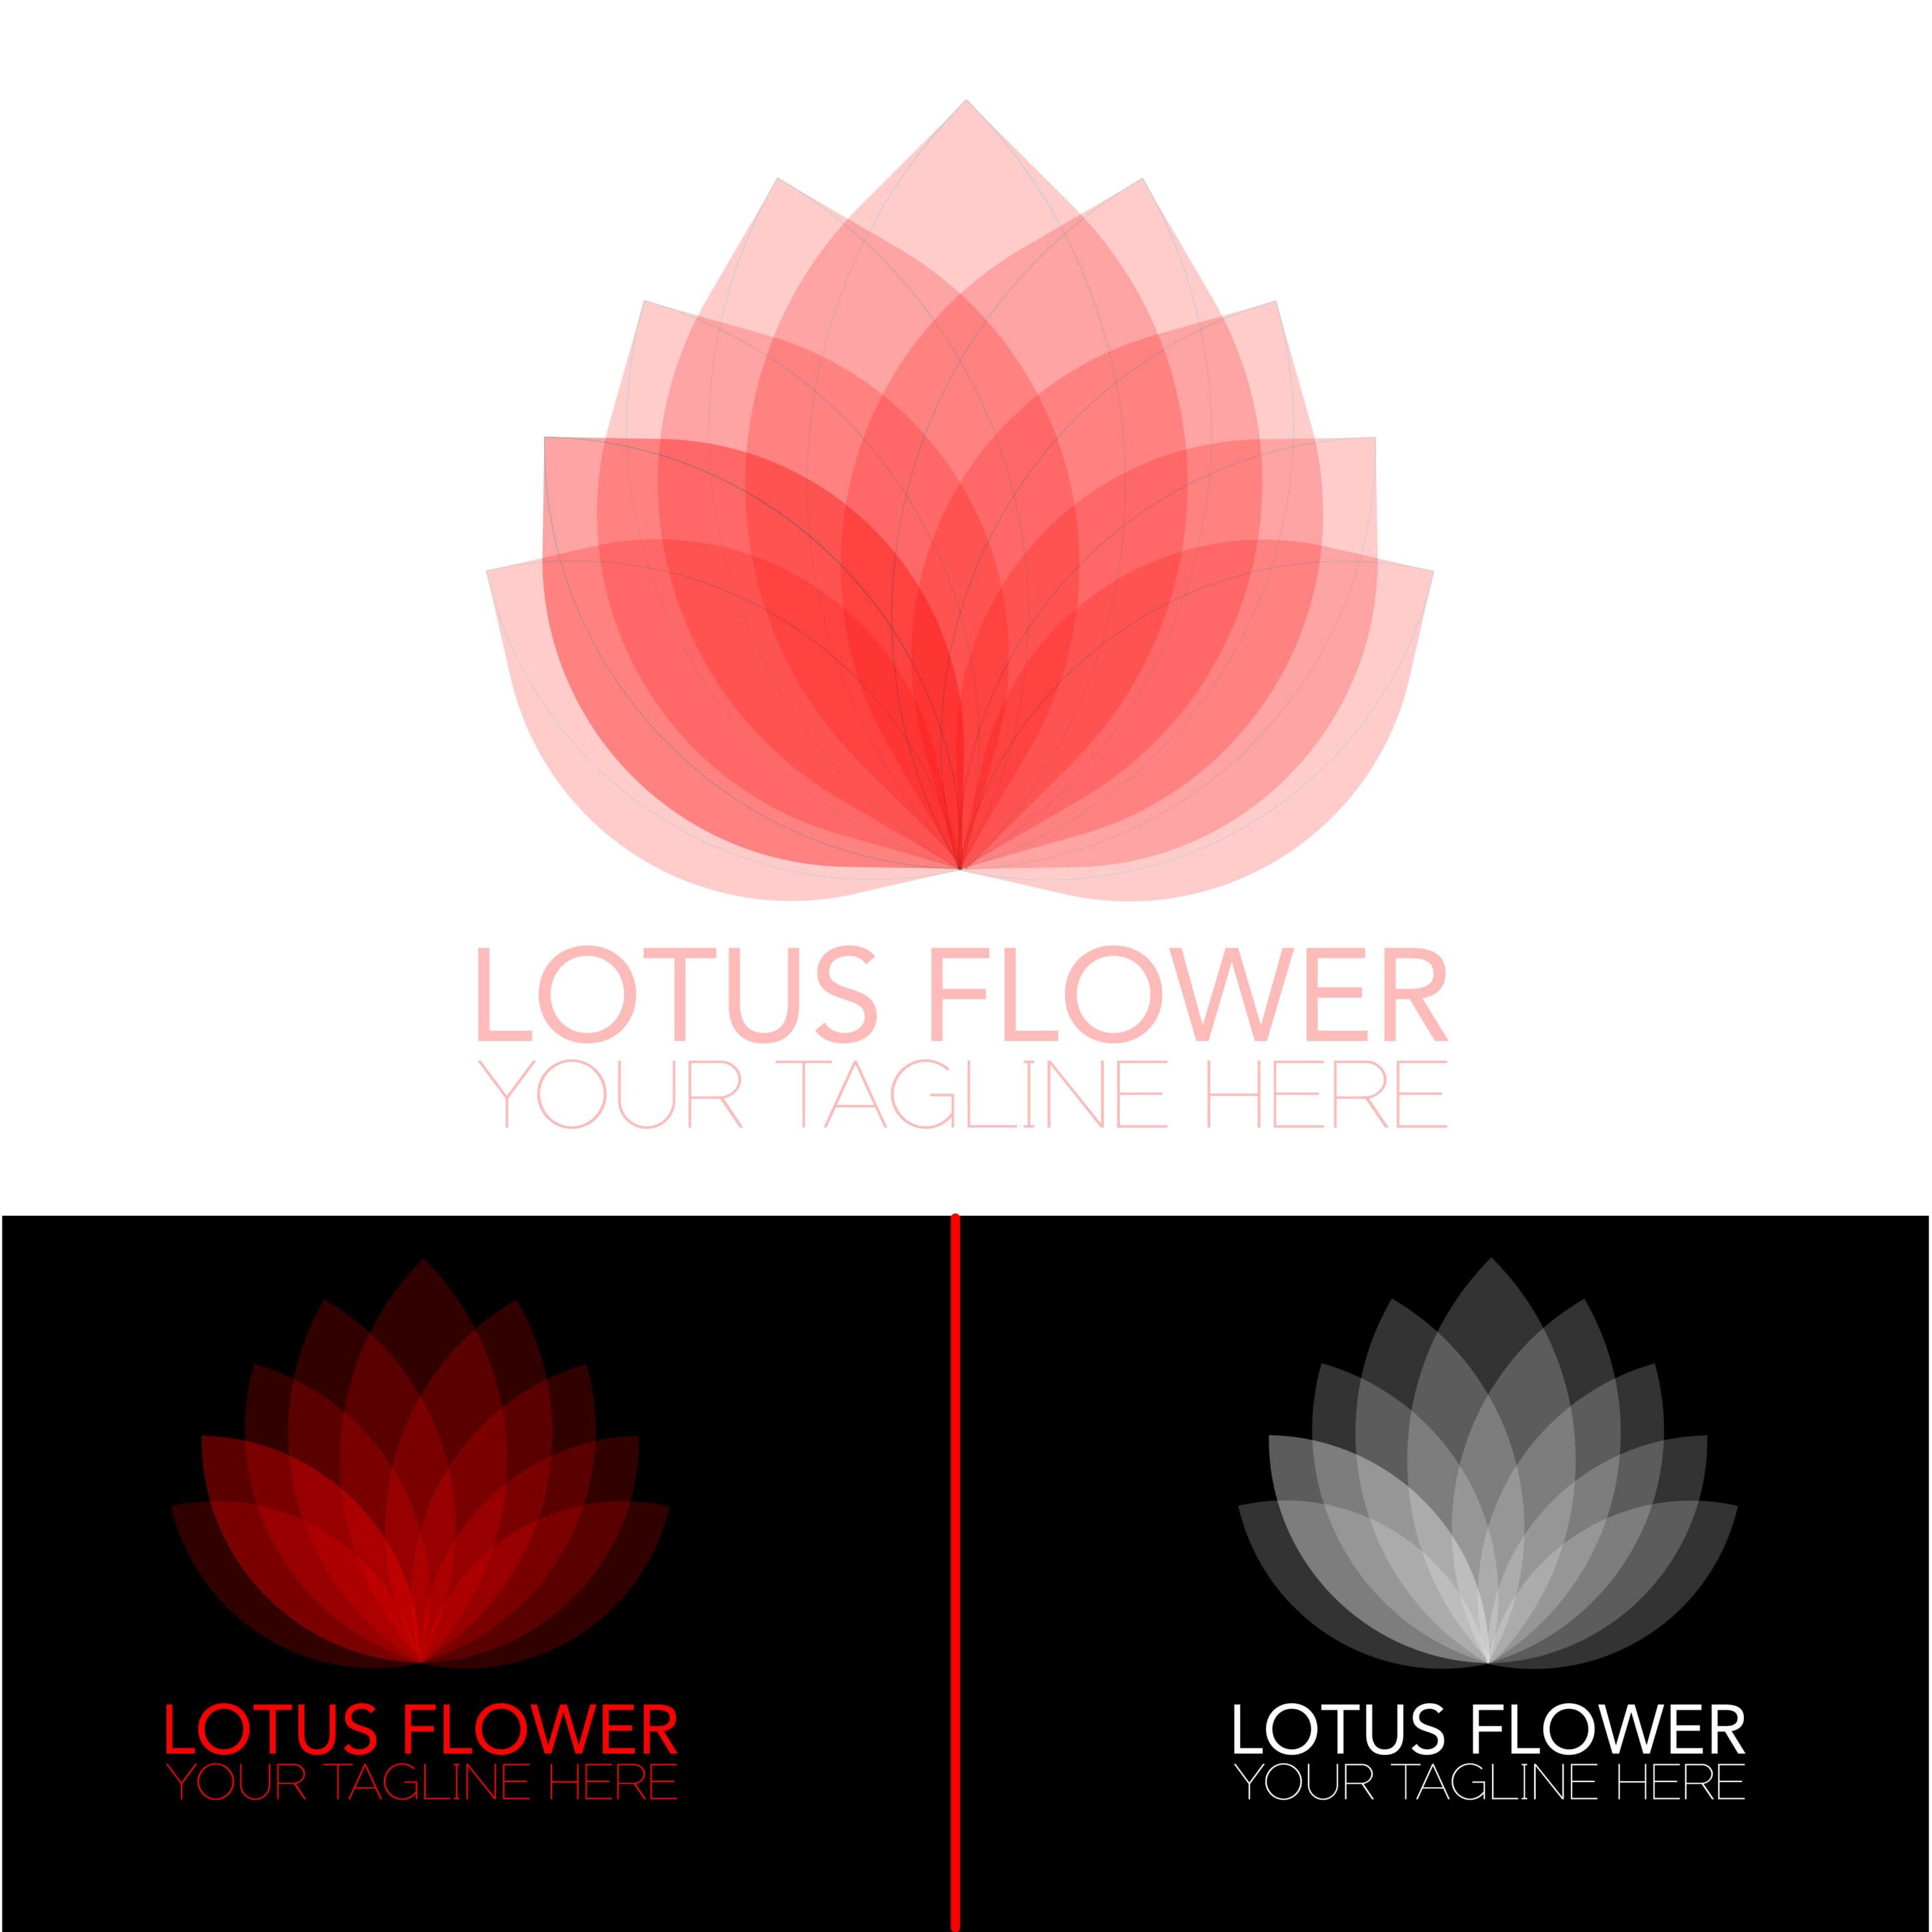 Lotus Flower Logo Collection in Different colors cover image.